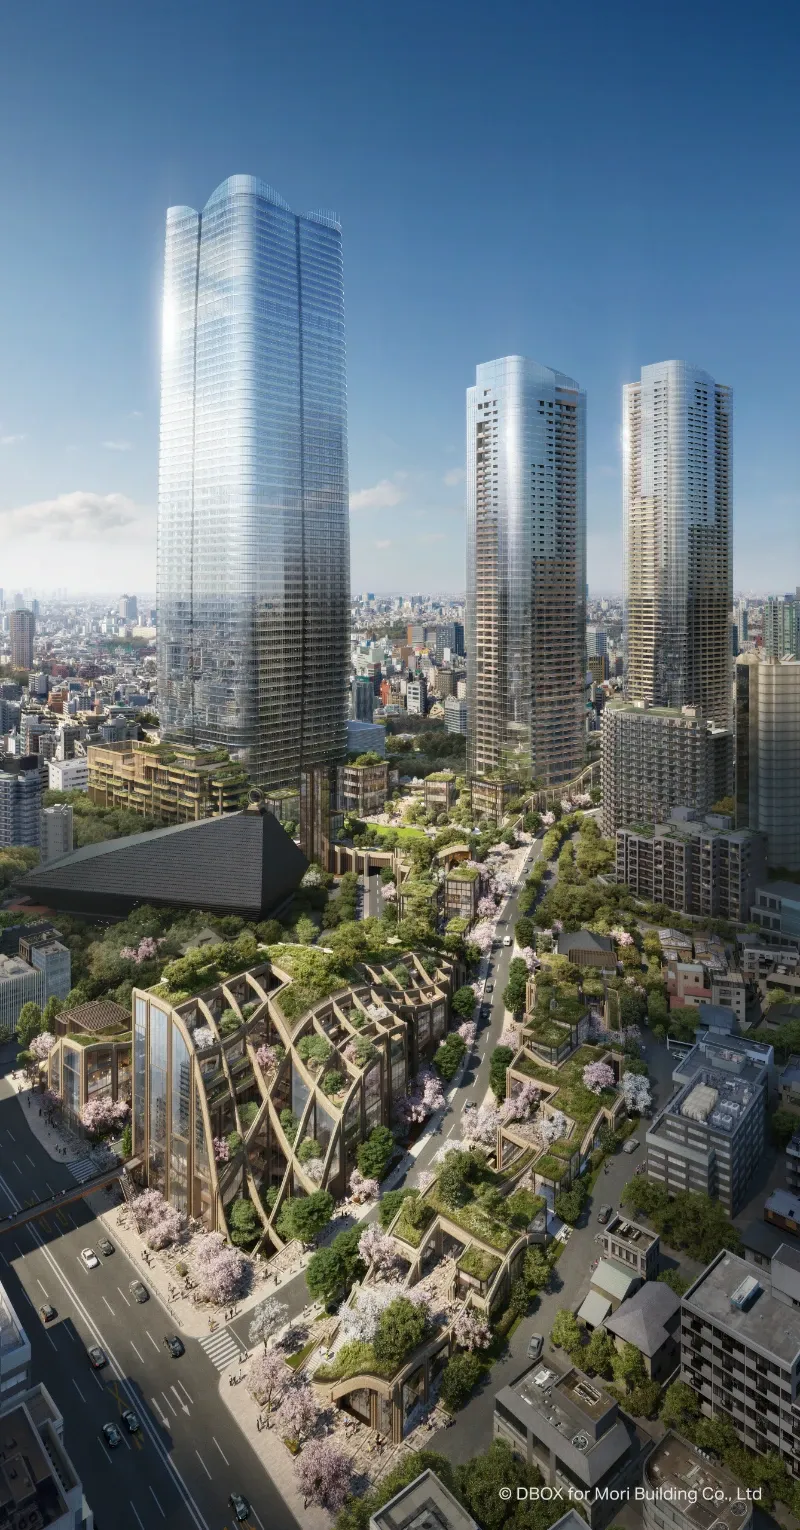 Janu Tokyo - Aman’s Sibling Brand First Hotel to Open in March 2024